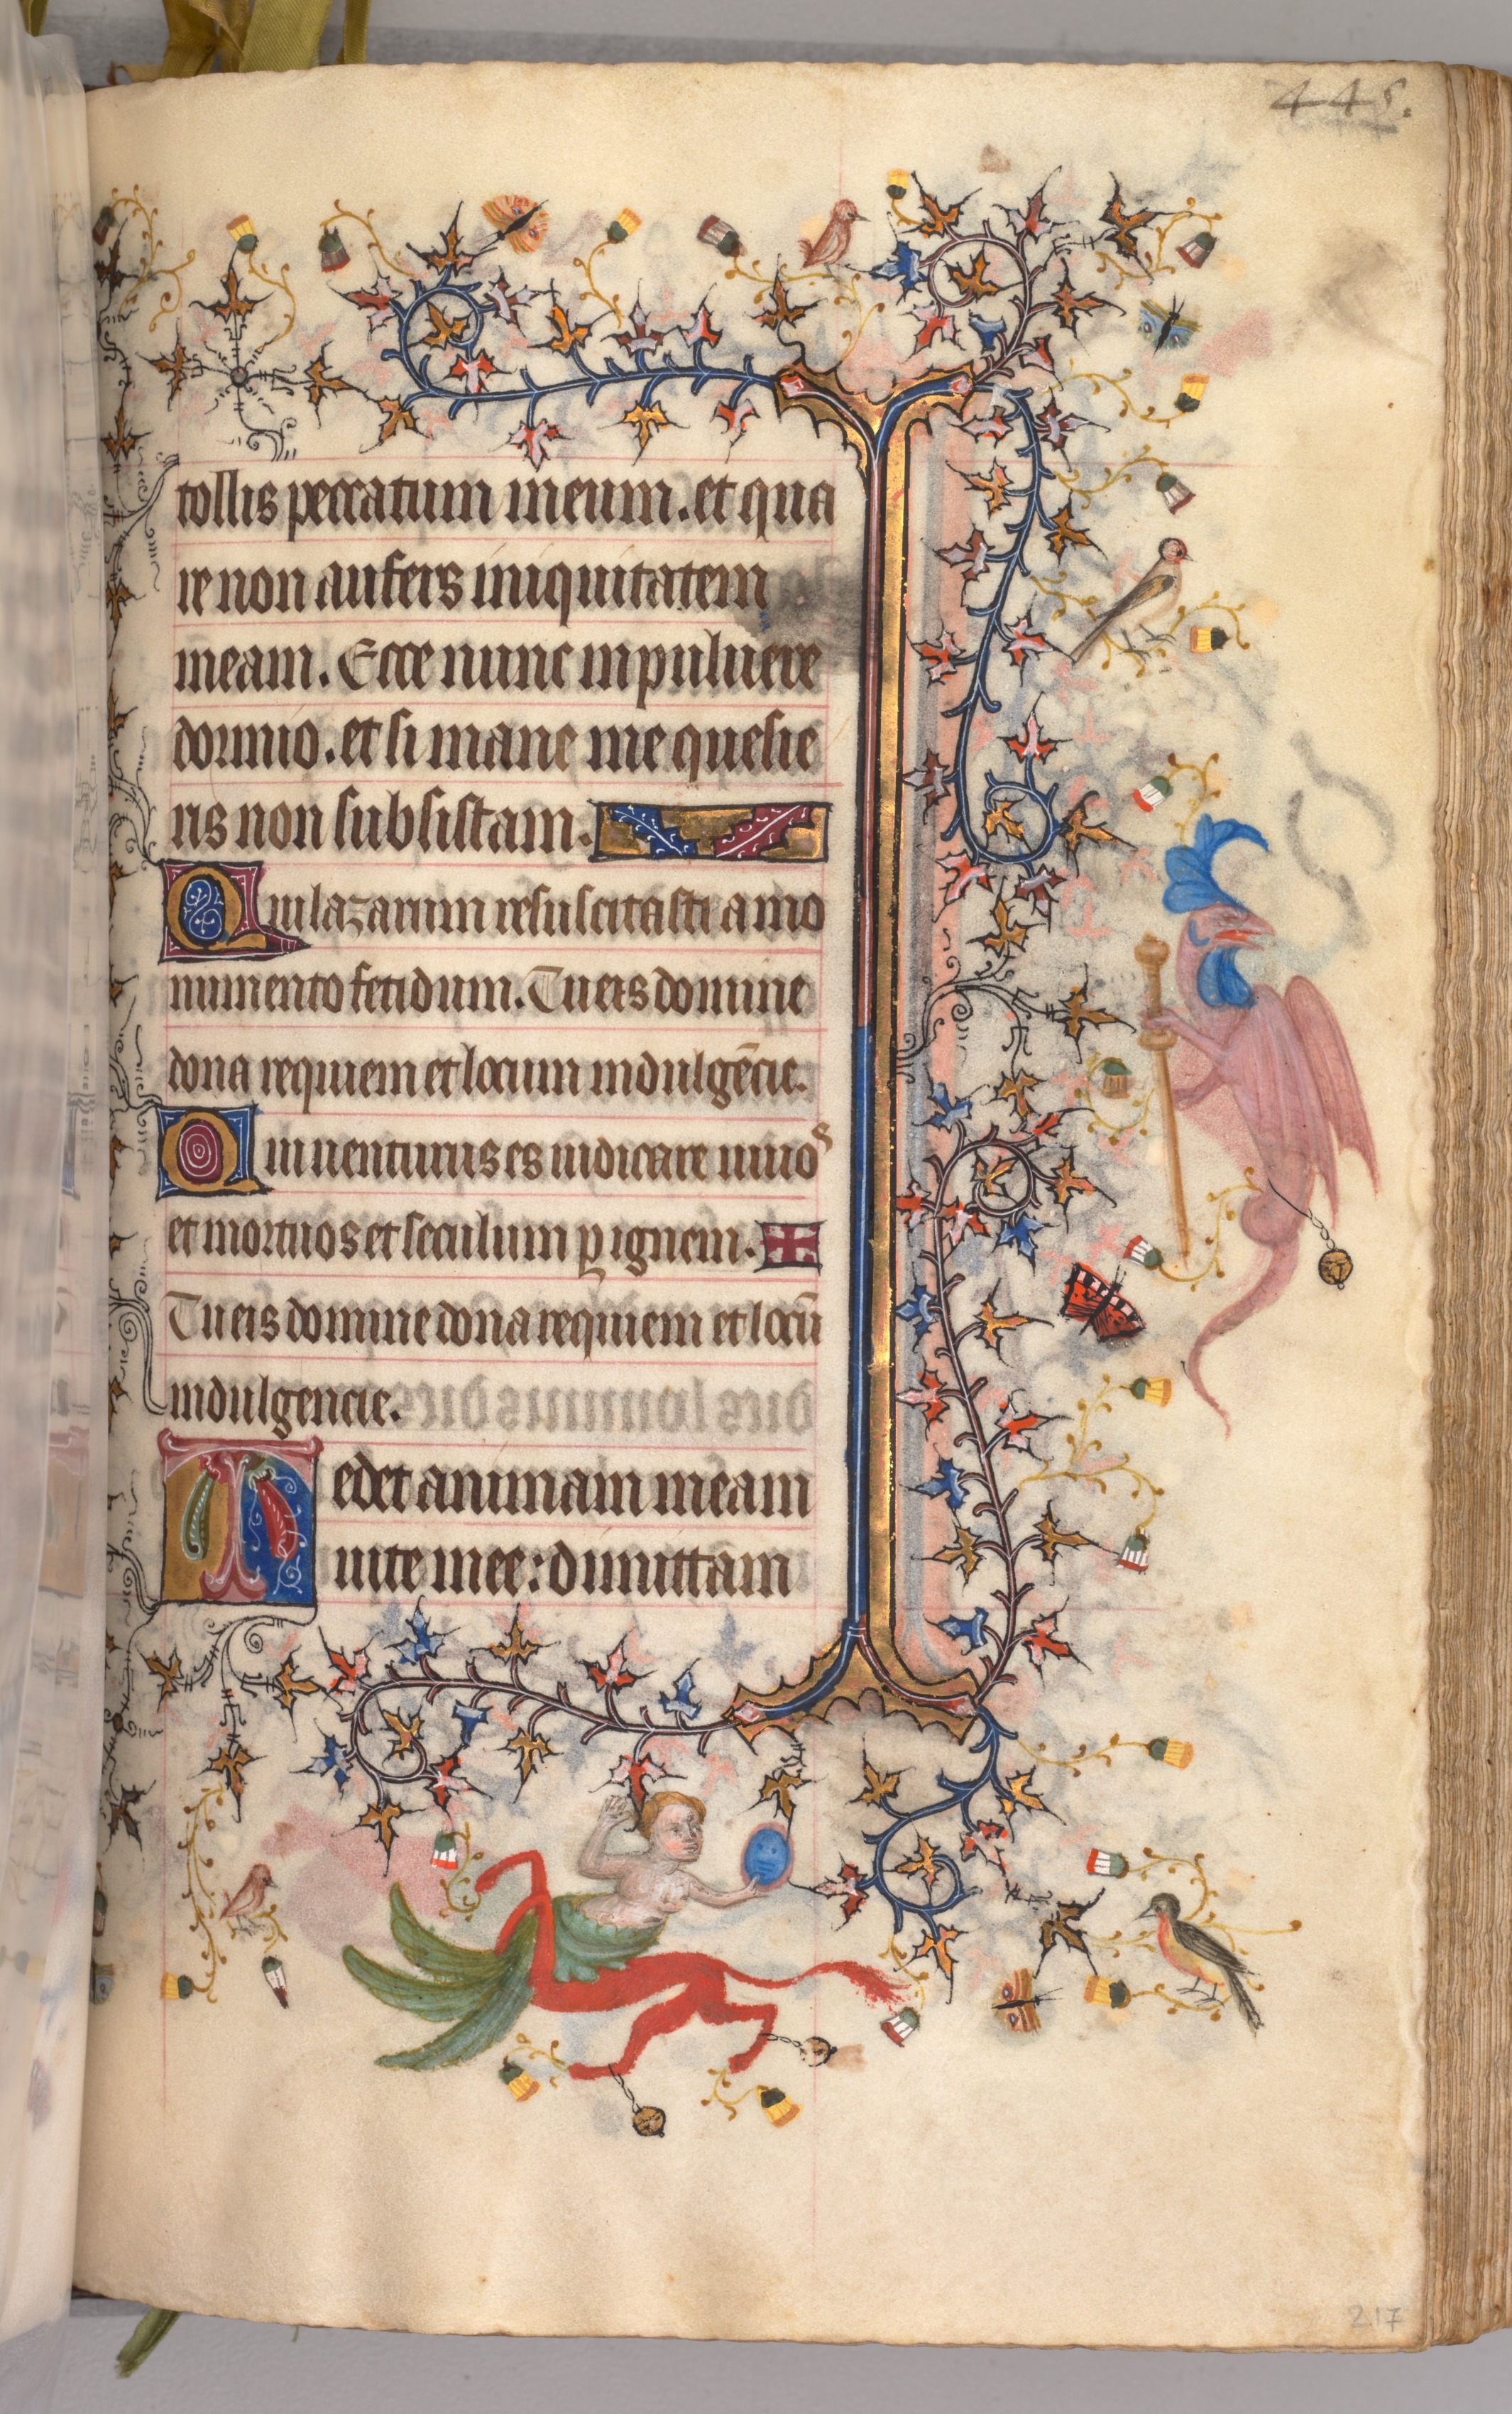 Hours of Charles the Noble, King of Navarre (1361-1425): fol. 217r, Text